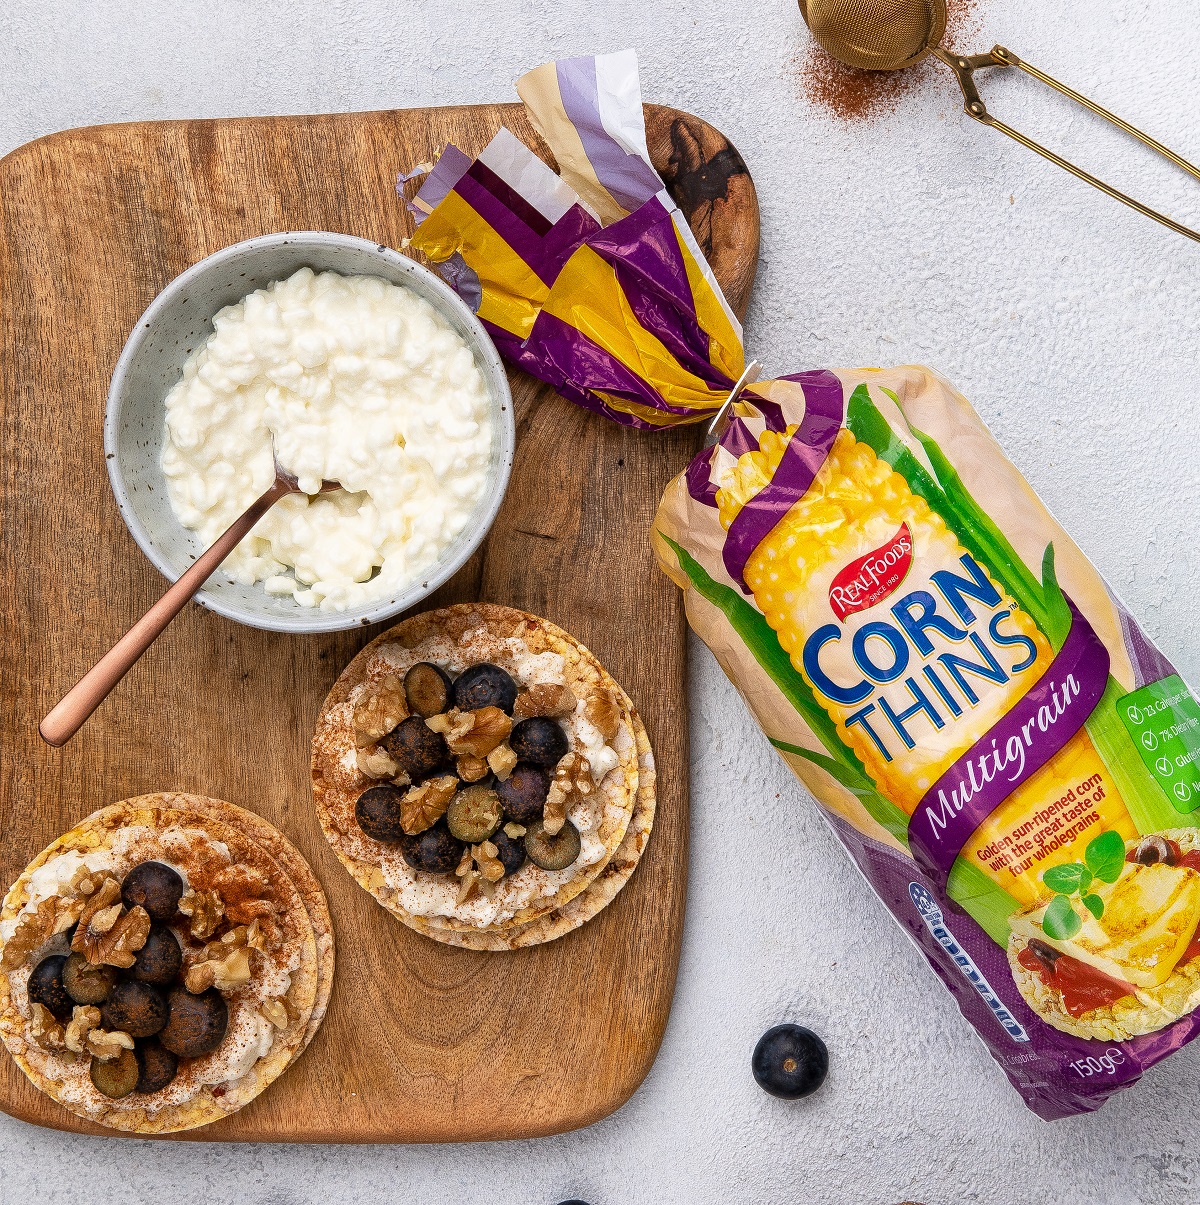 cottage cheese, blueberries, walnuts & cinnamon on Corn Thins slices